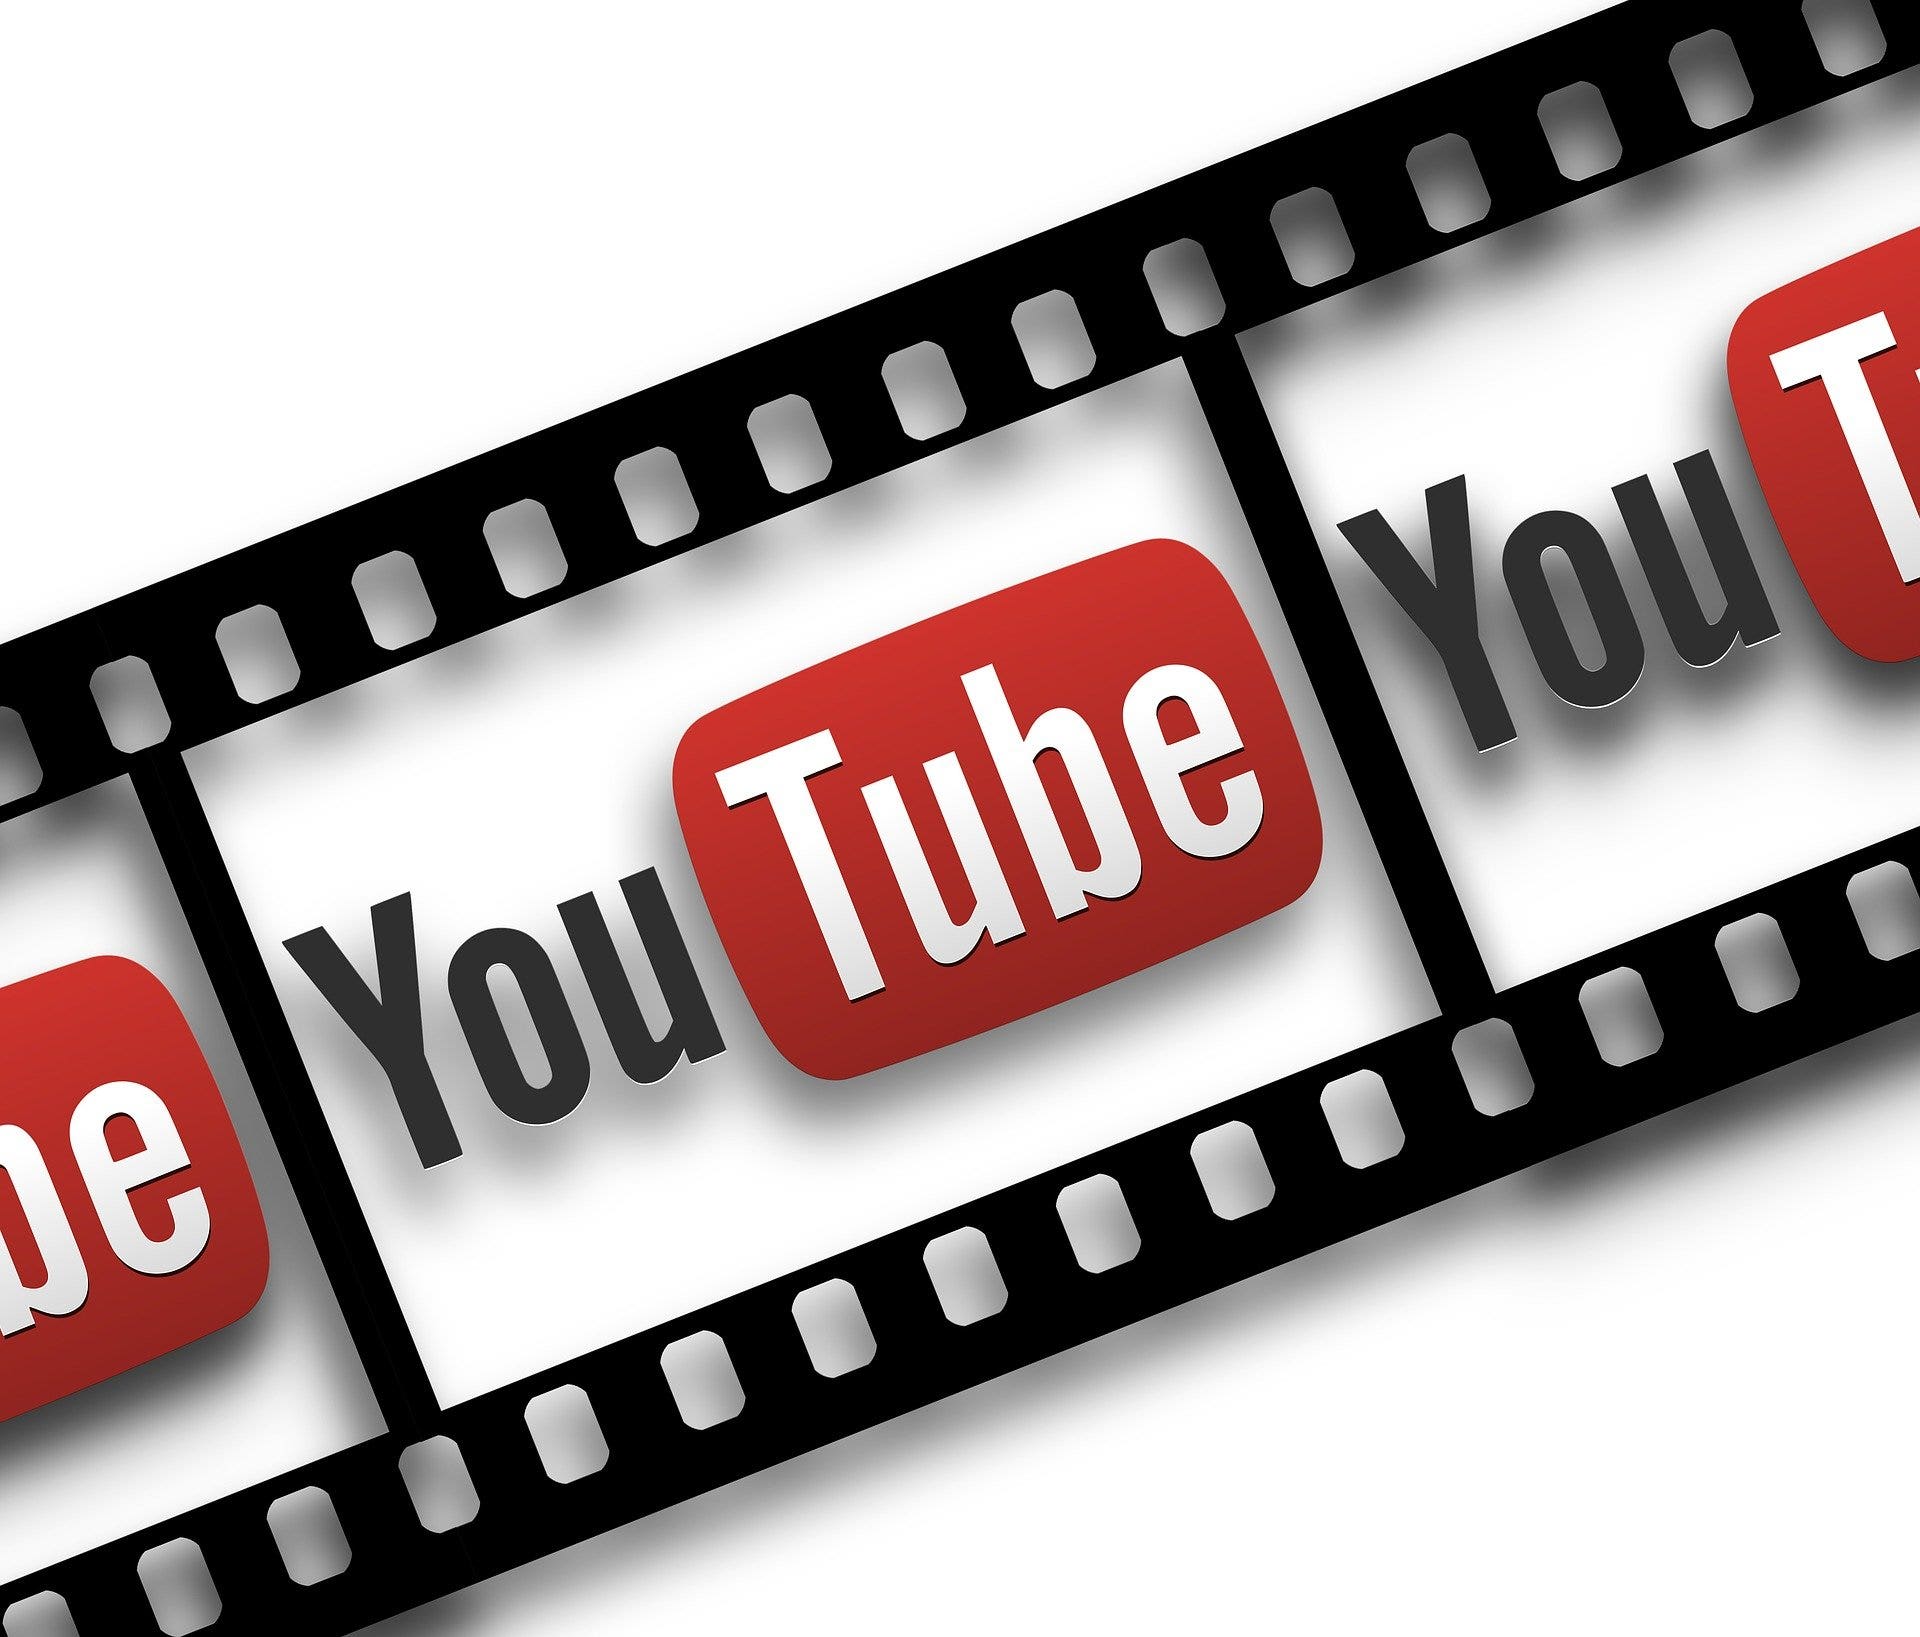 YouTube Adds More Shopping Features To Diversify Revenue Stream